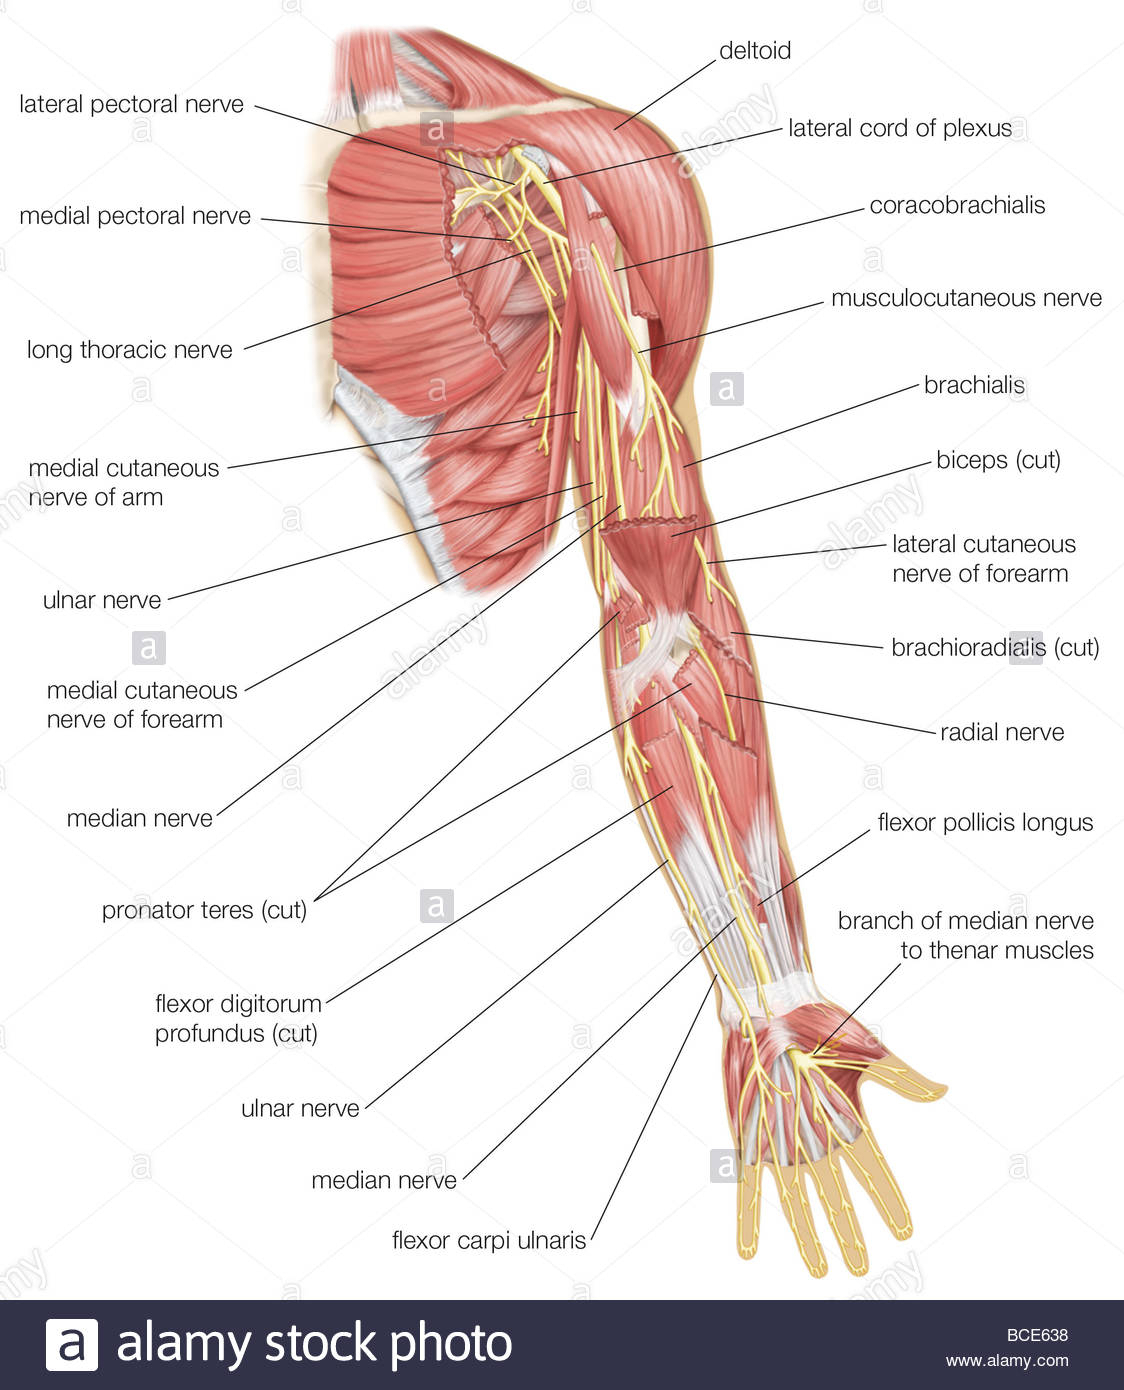 Arm Muscle Diagram Arm Muscle Diagram Gallery Upper Arm Muscle Diagram Anatomy